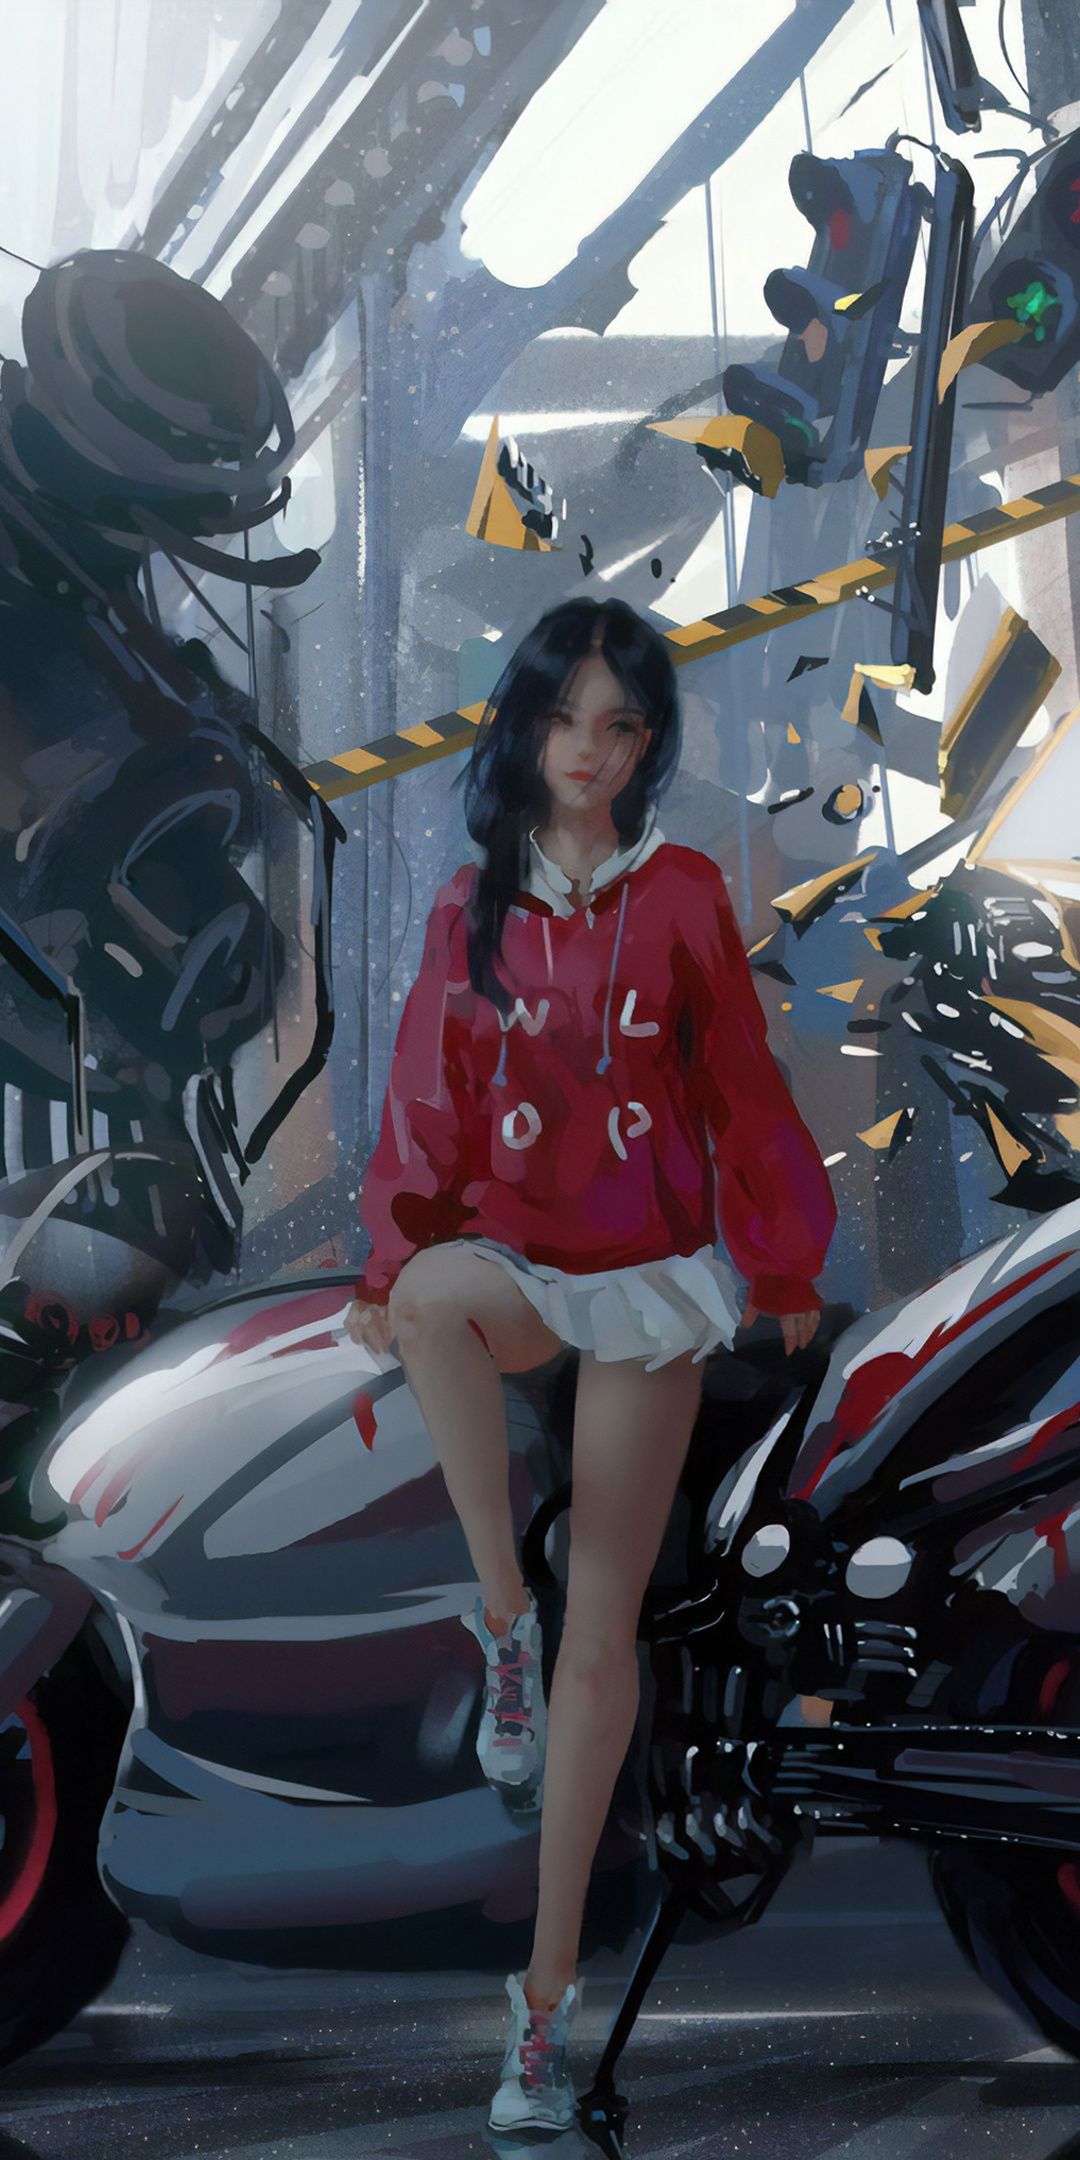 Anime Biker Girl 4k One Plus 5T, Honor 7x, Honor view Lg Q6 HD 4k Wallpaper, Image, Background, Photo and Picture